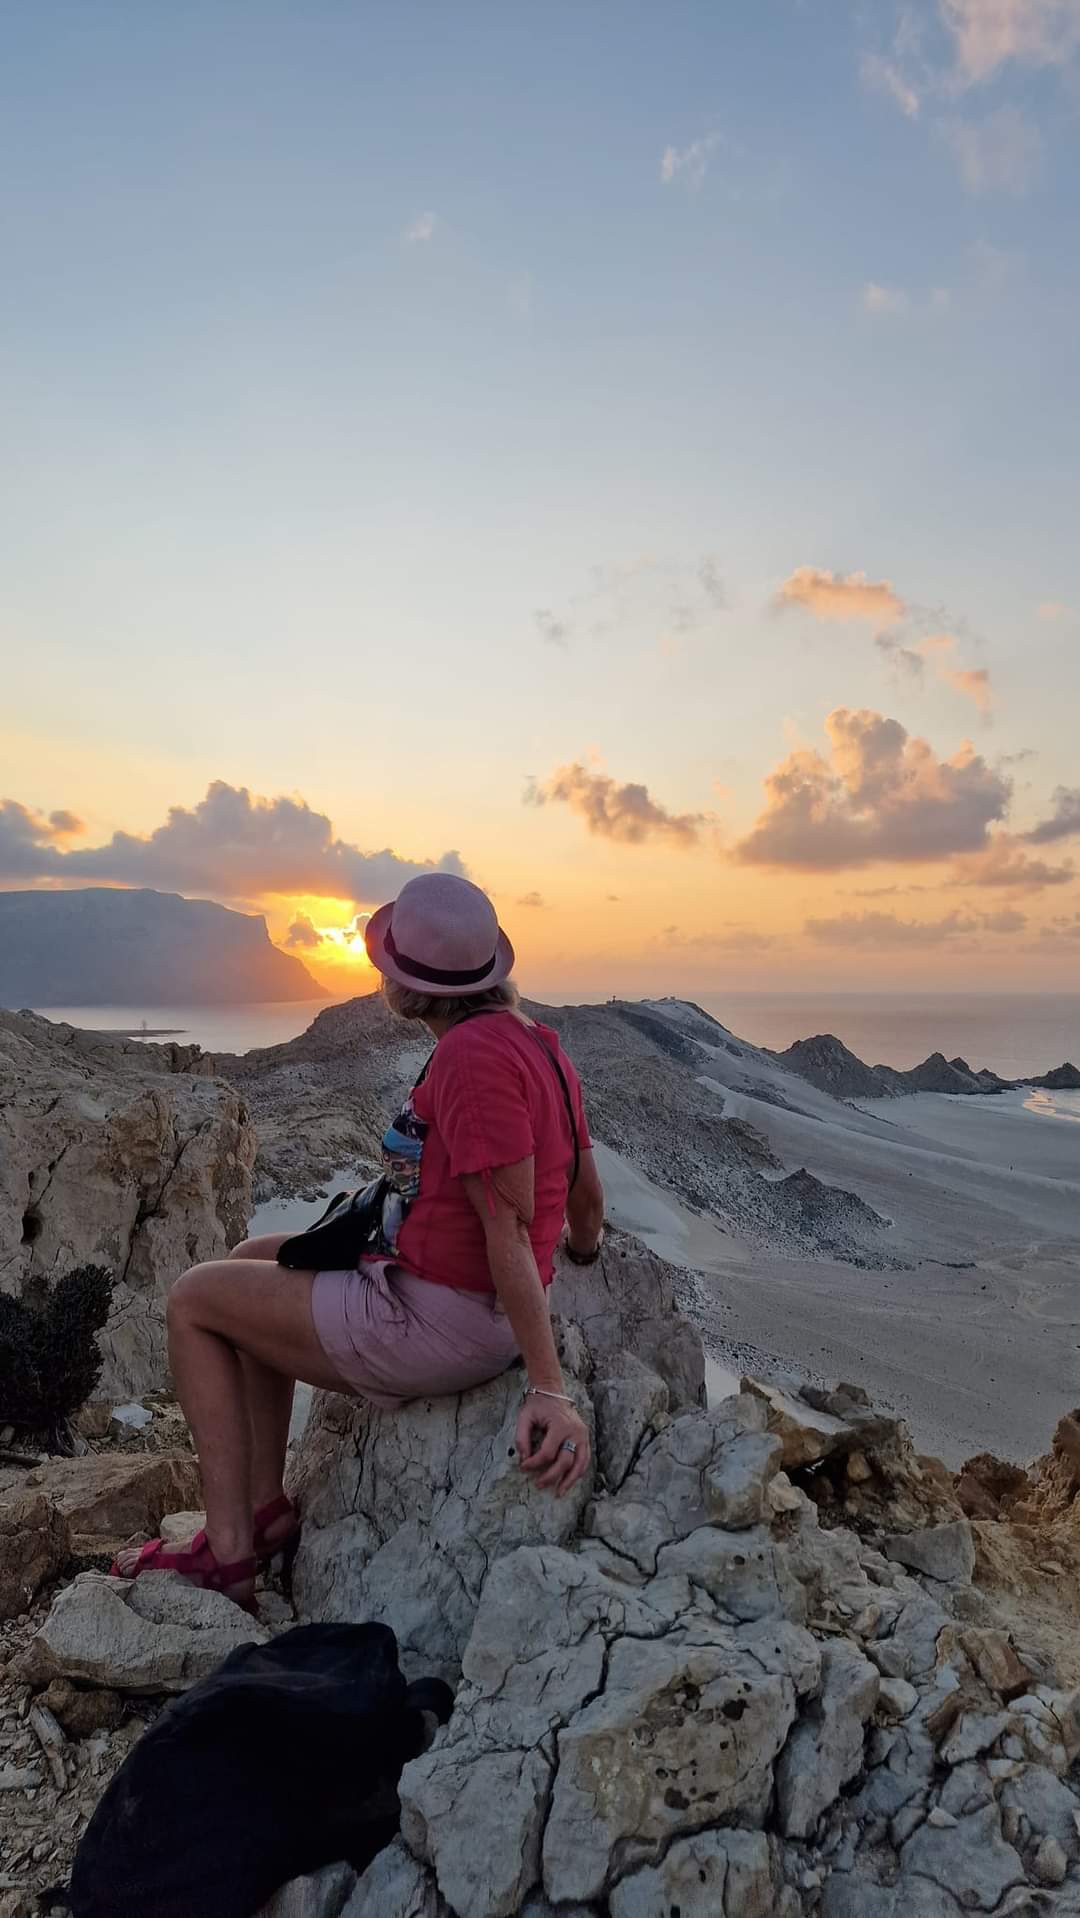 Me watching sunset in Socotra